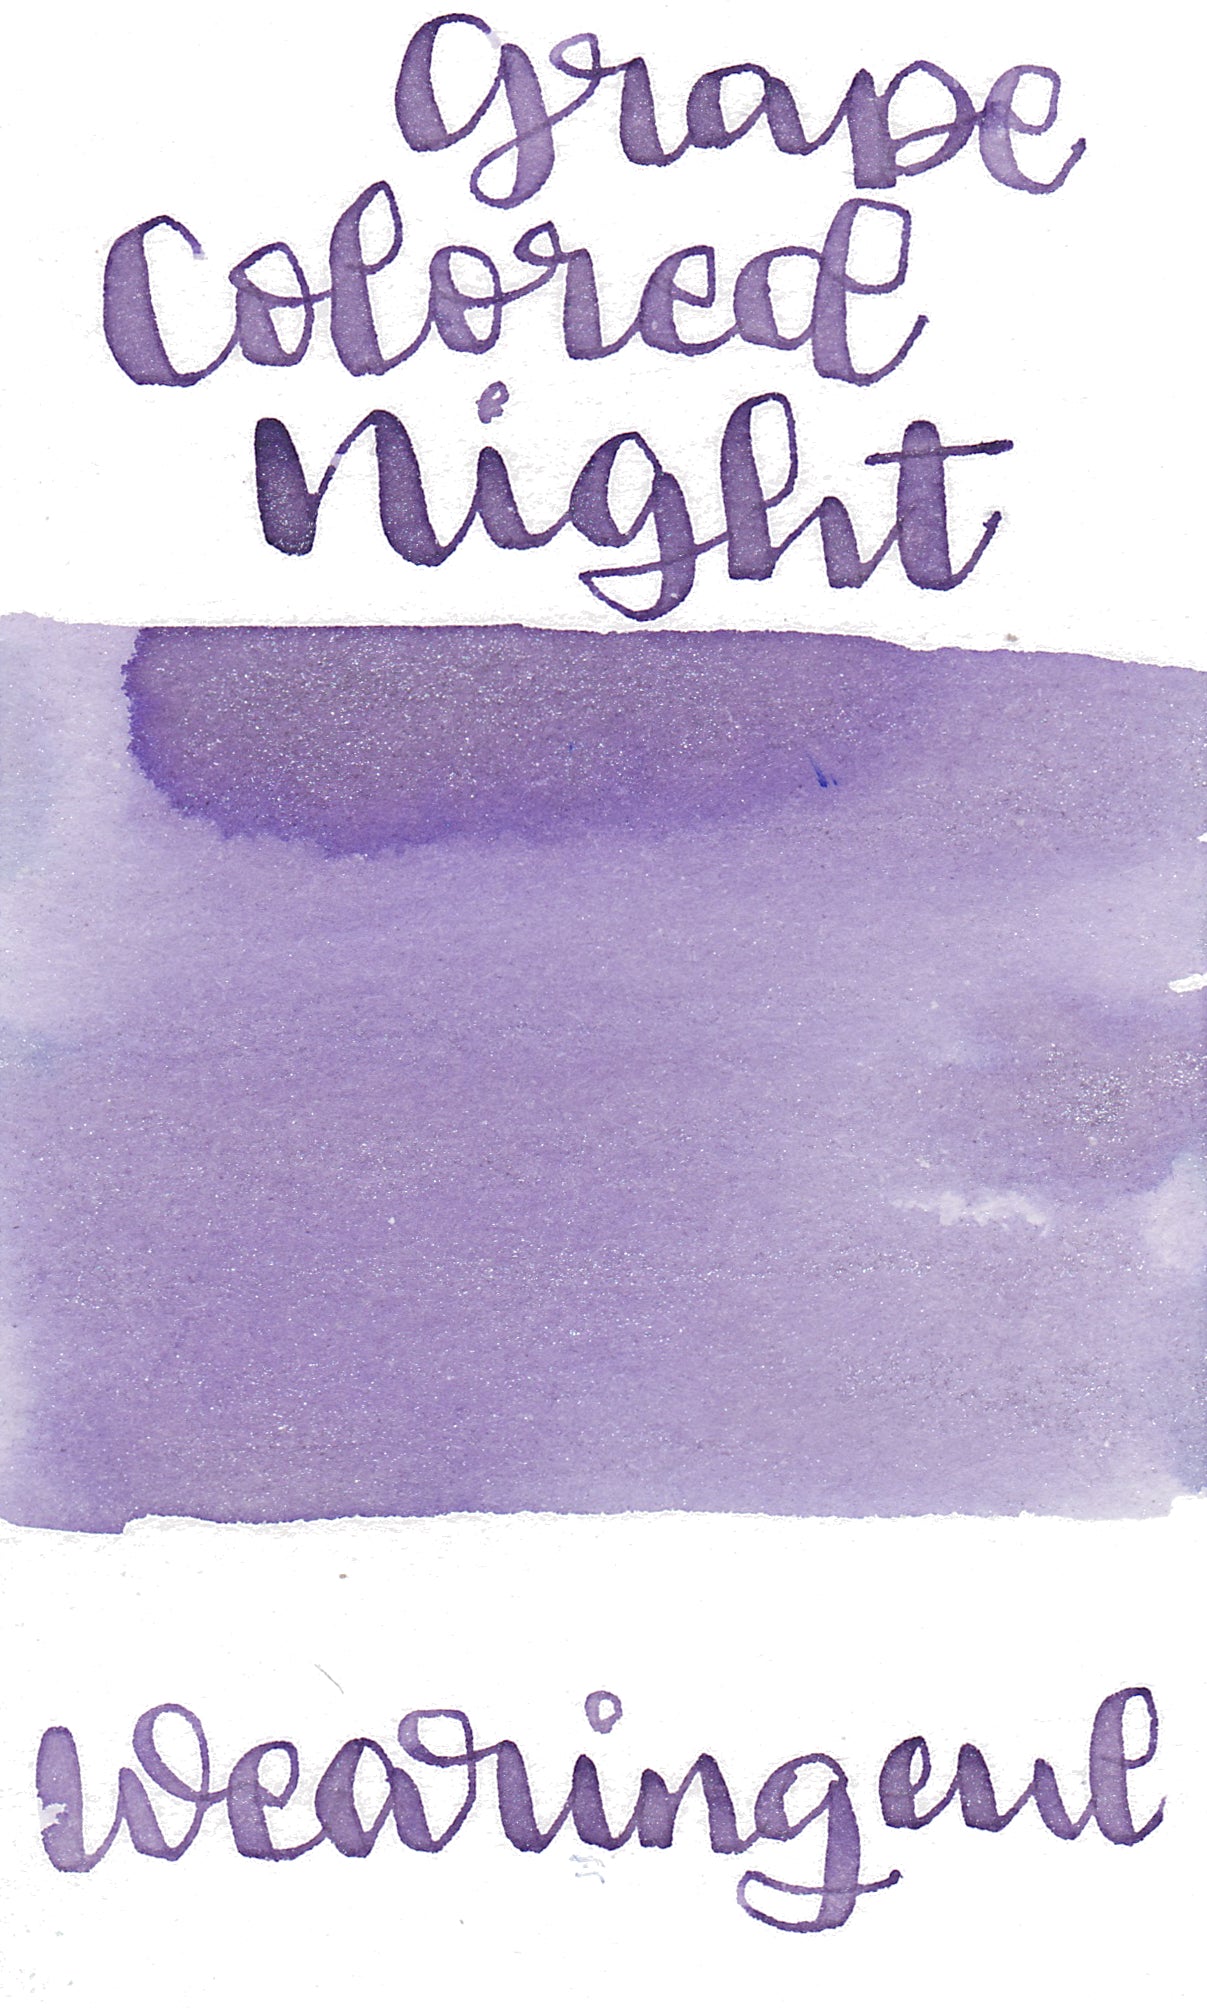 Wearingeul The Night Colored in Grape Ink